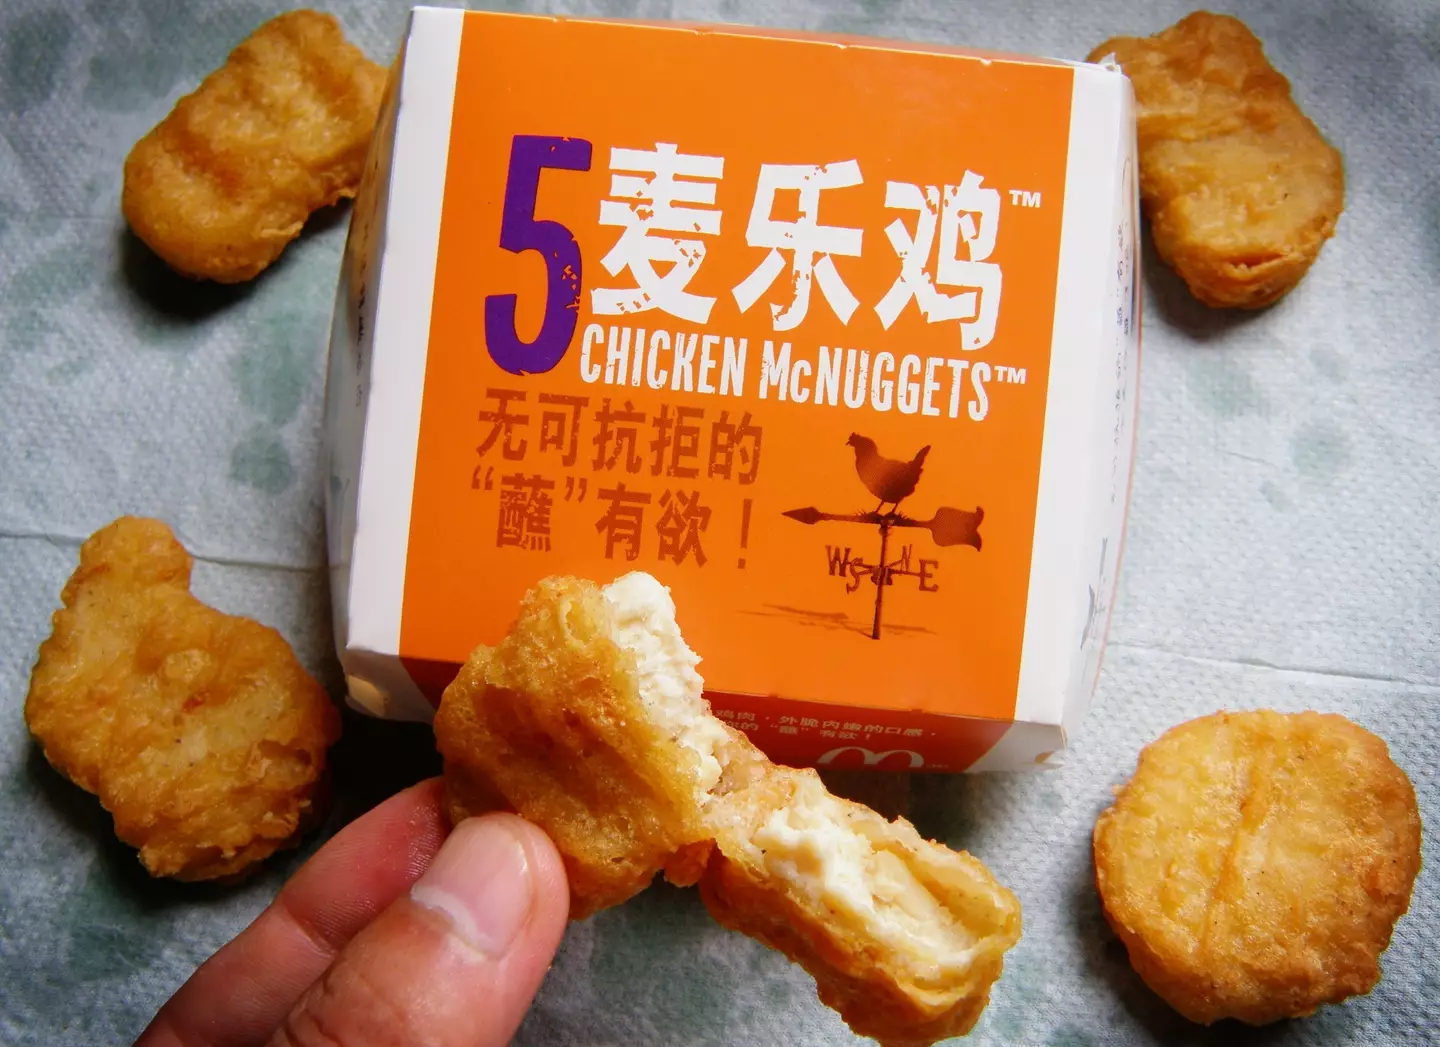 Sauces were introduced at McDonald's to go with McNuggets.